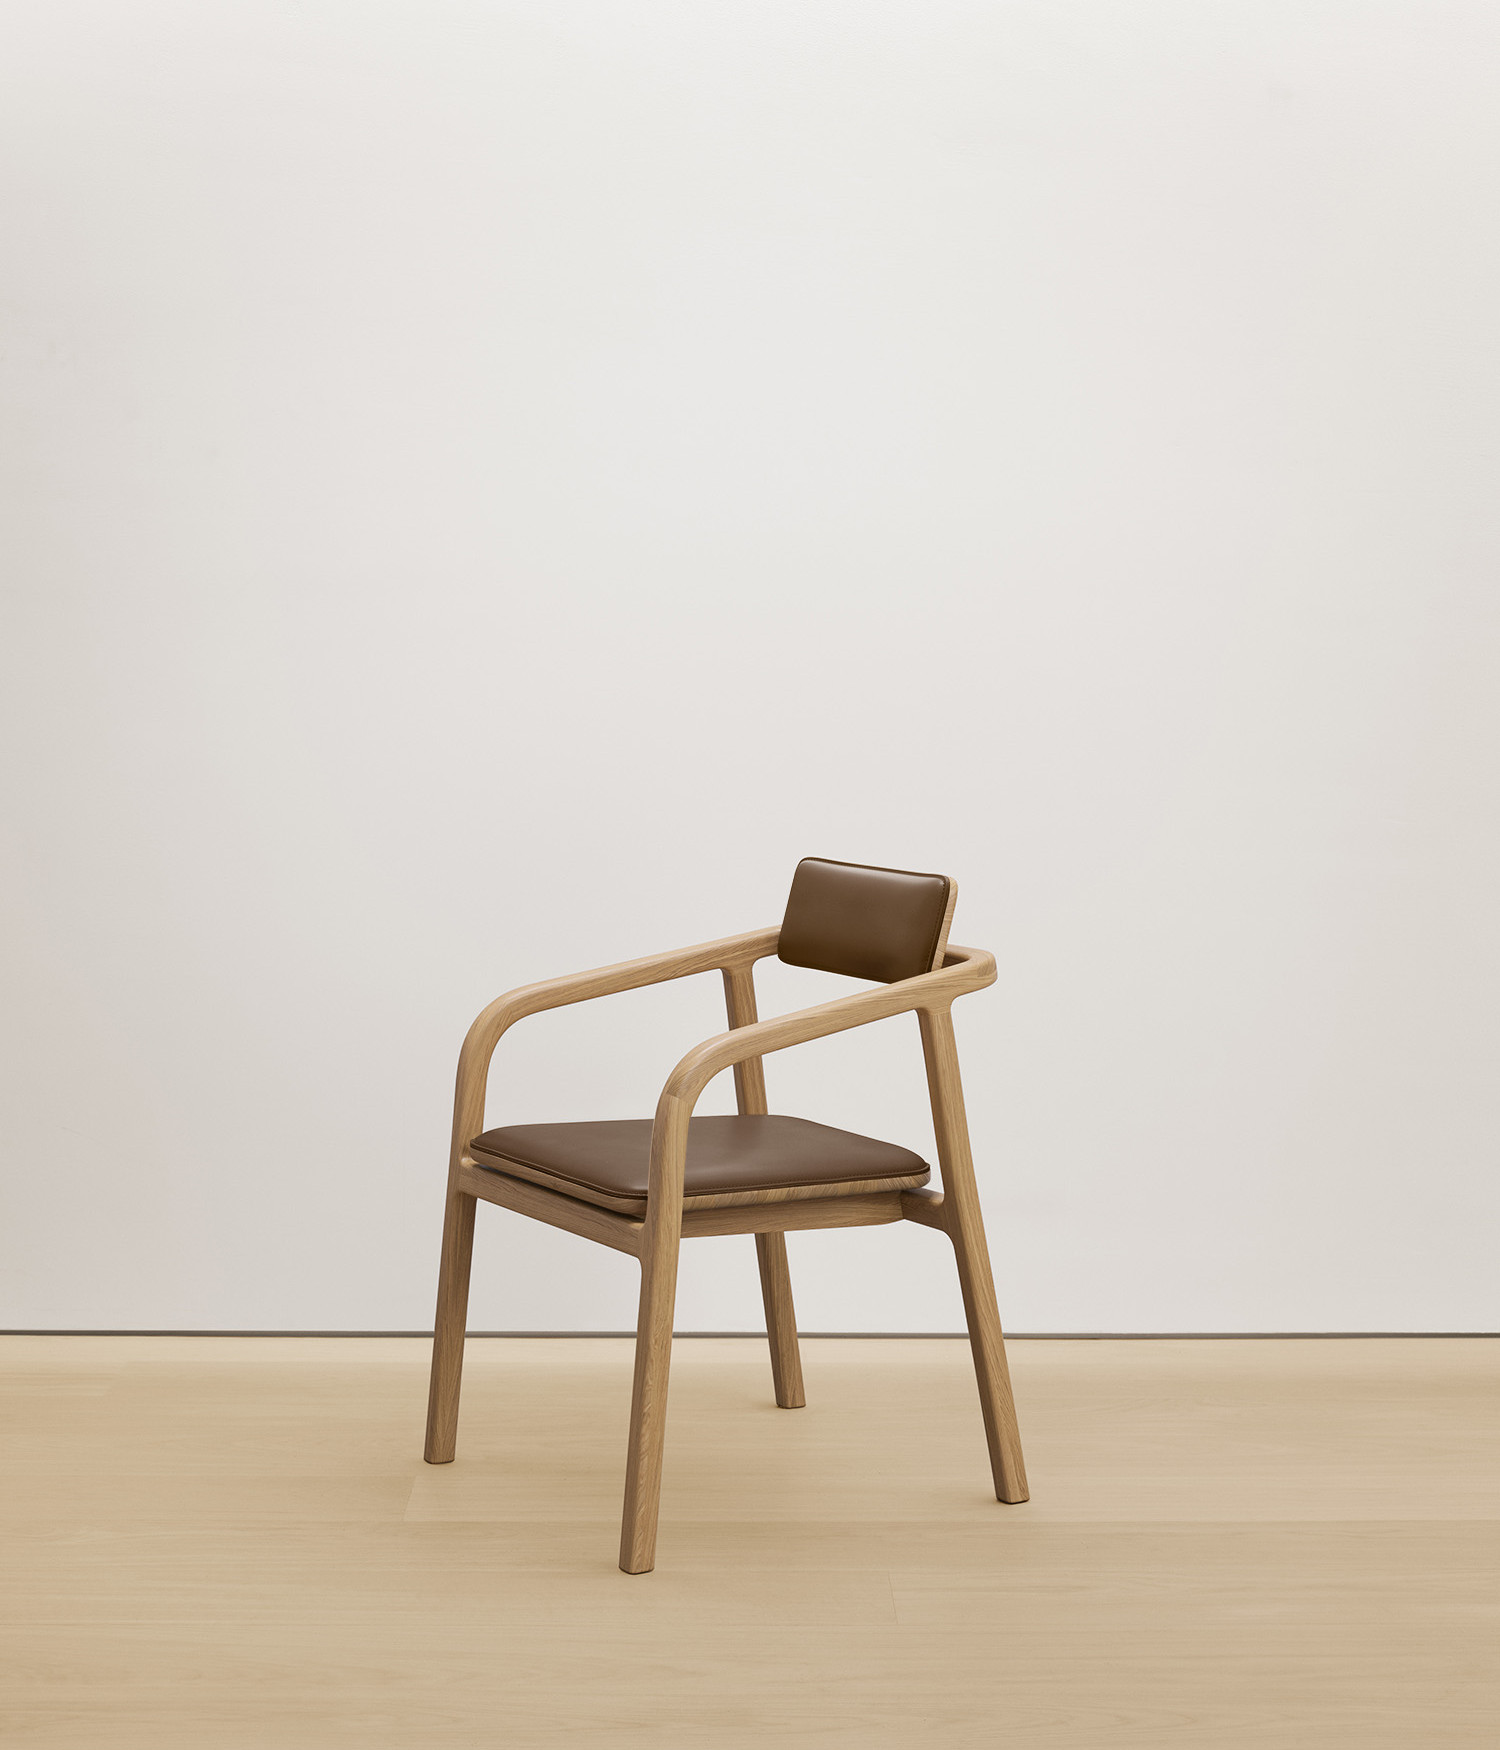  white-oak chair with umber color upholstered seat